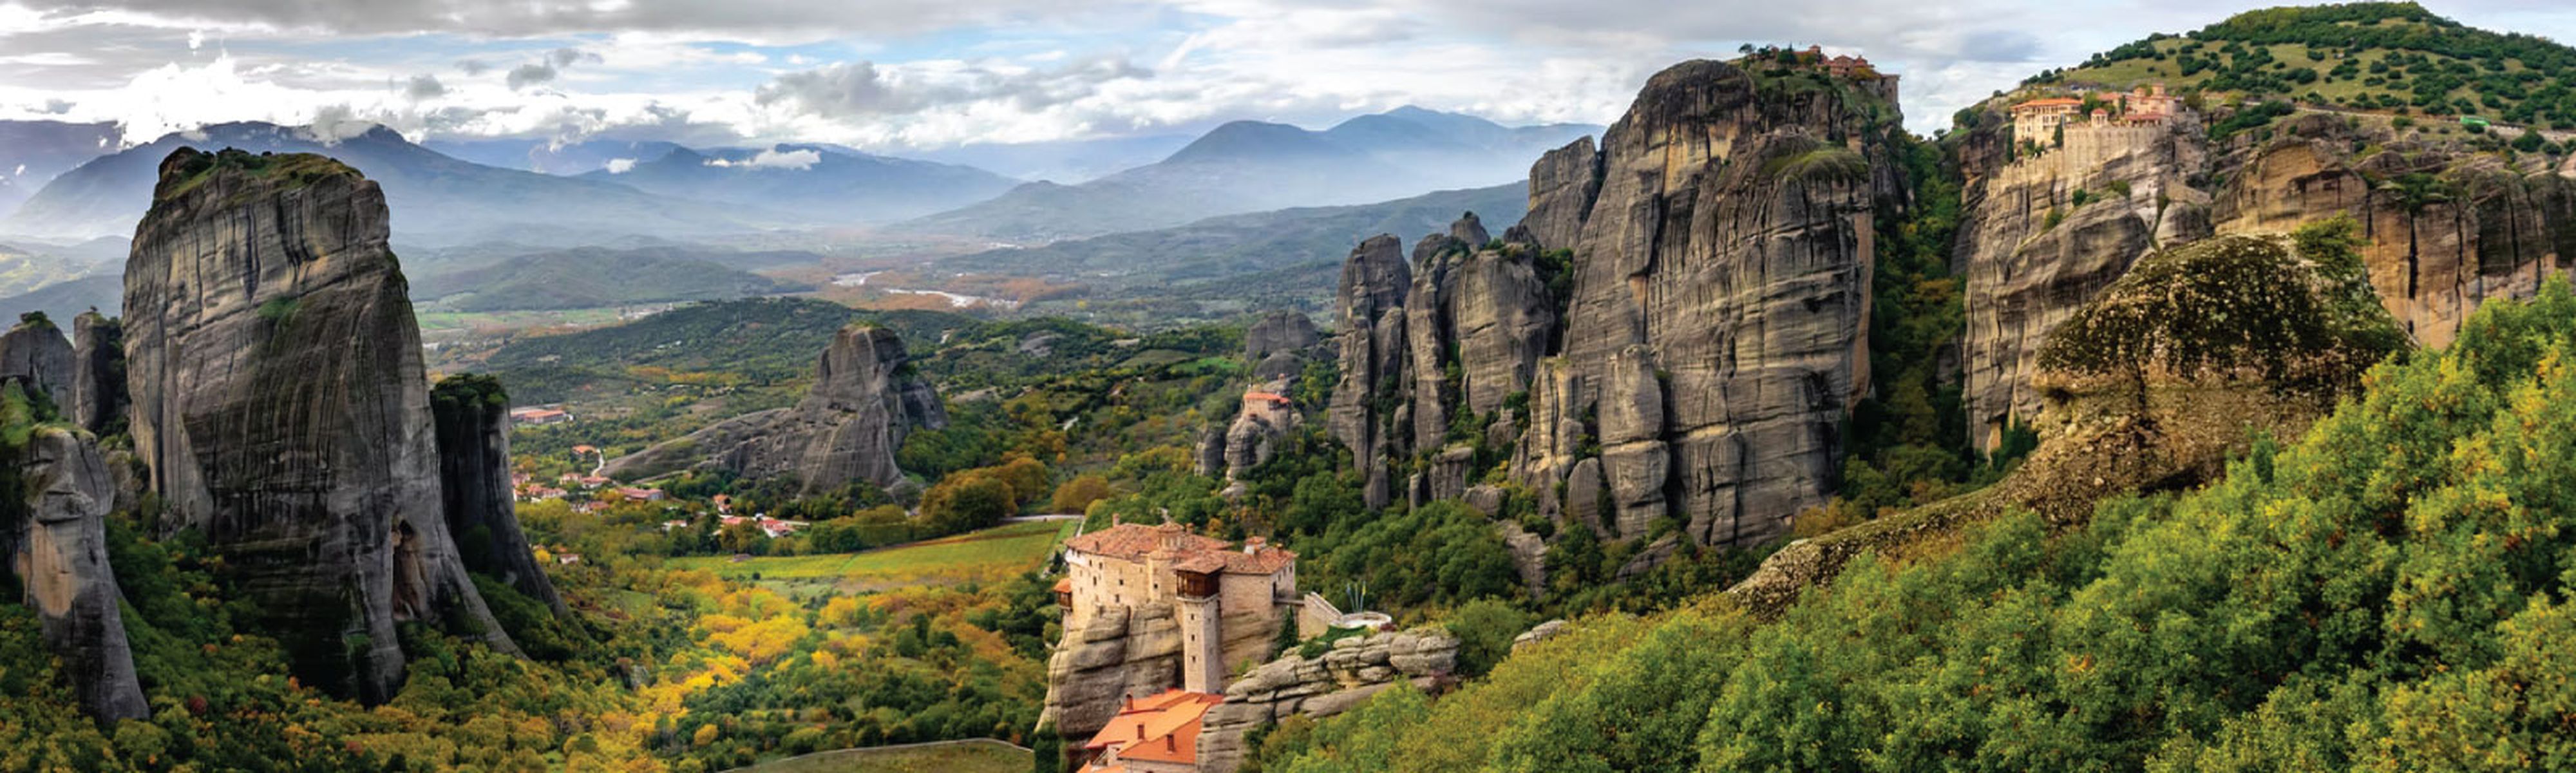 monastery sitting on rockly cliff in meteora greece